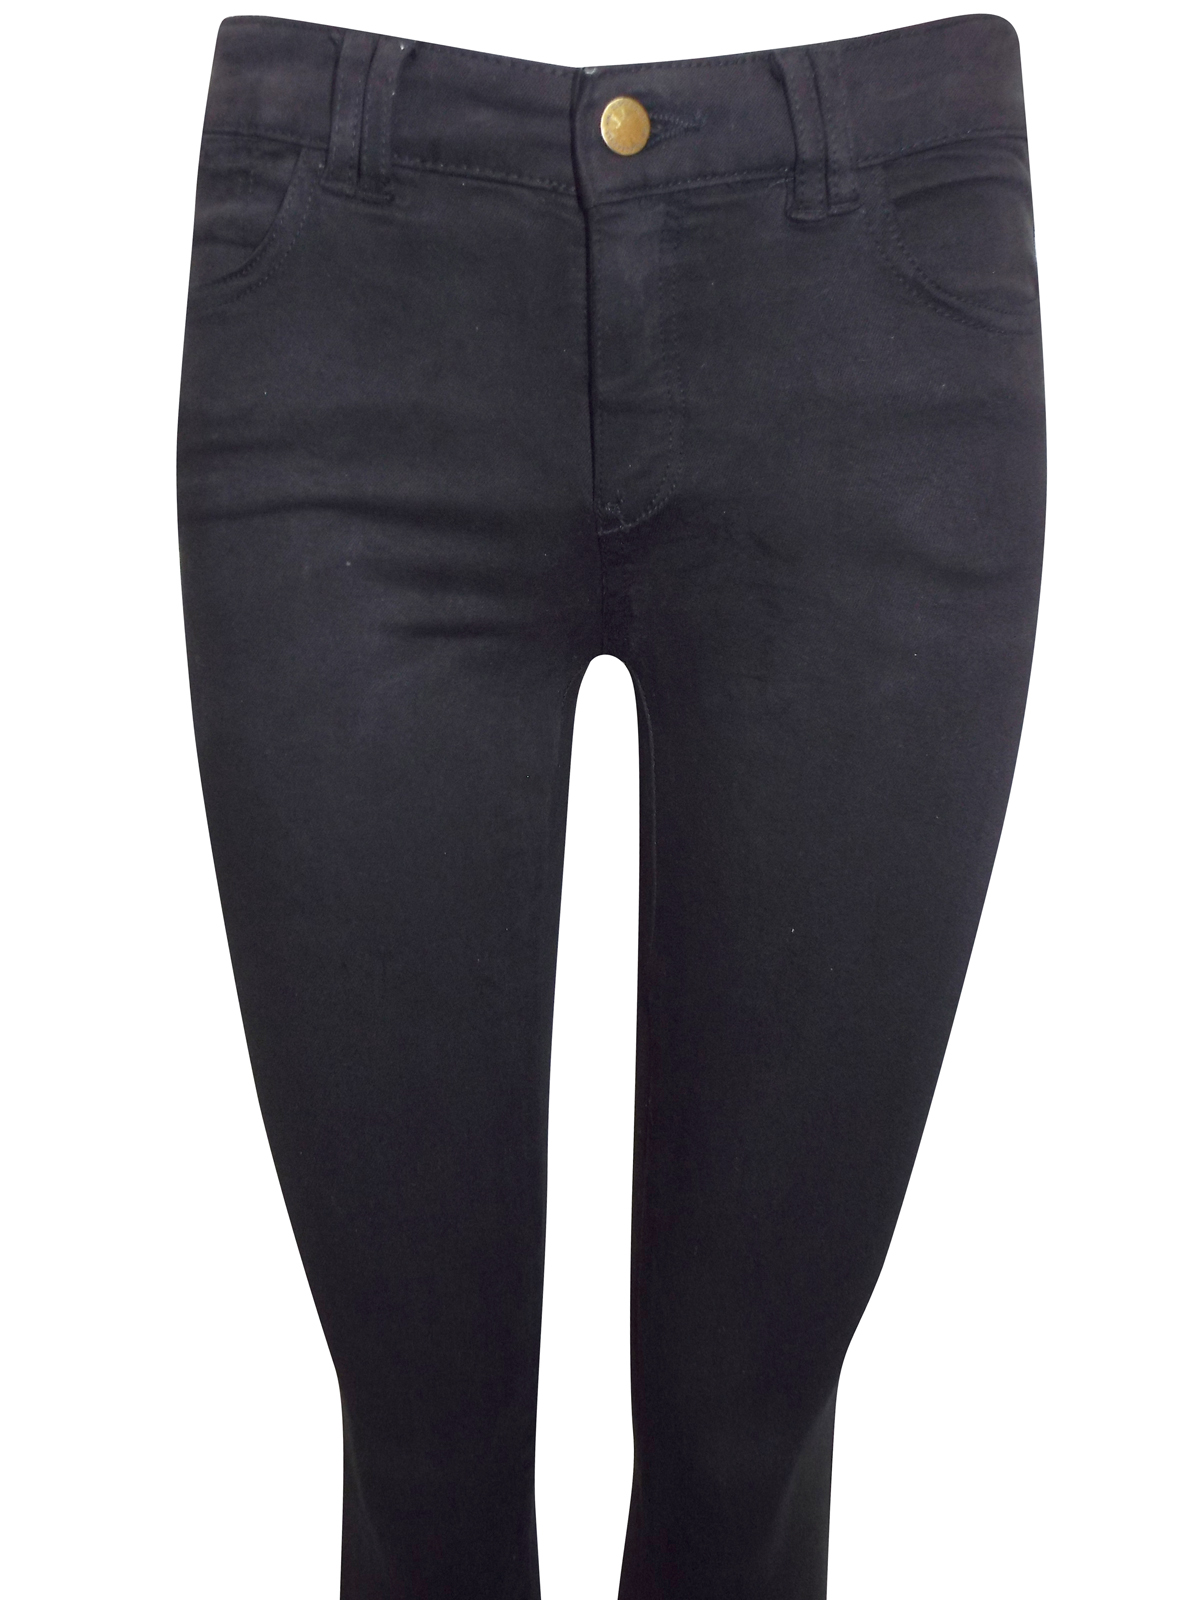 Clockhouse BLACK Cotton Rich Skinny Jeans - Size 8 to 16